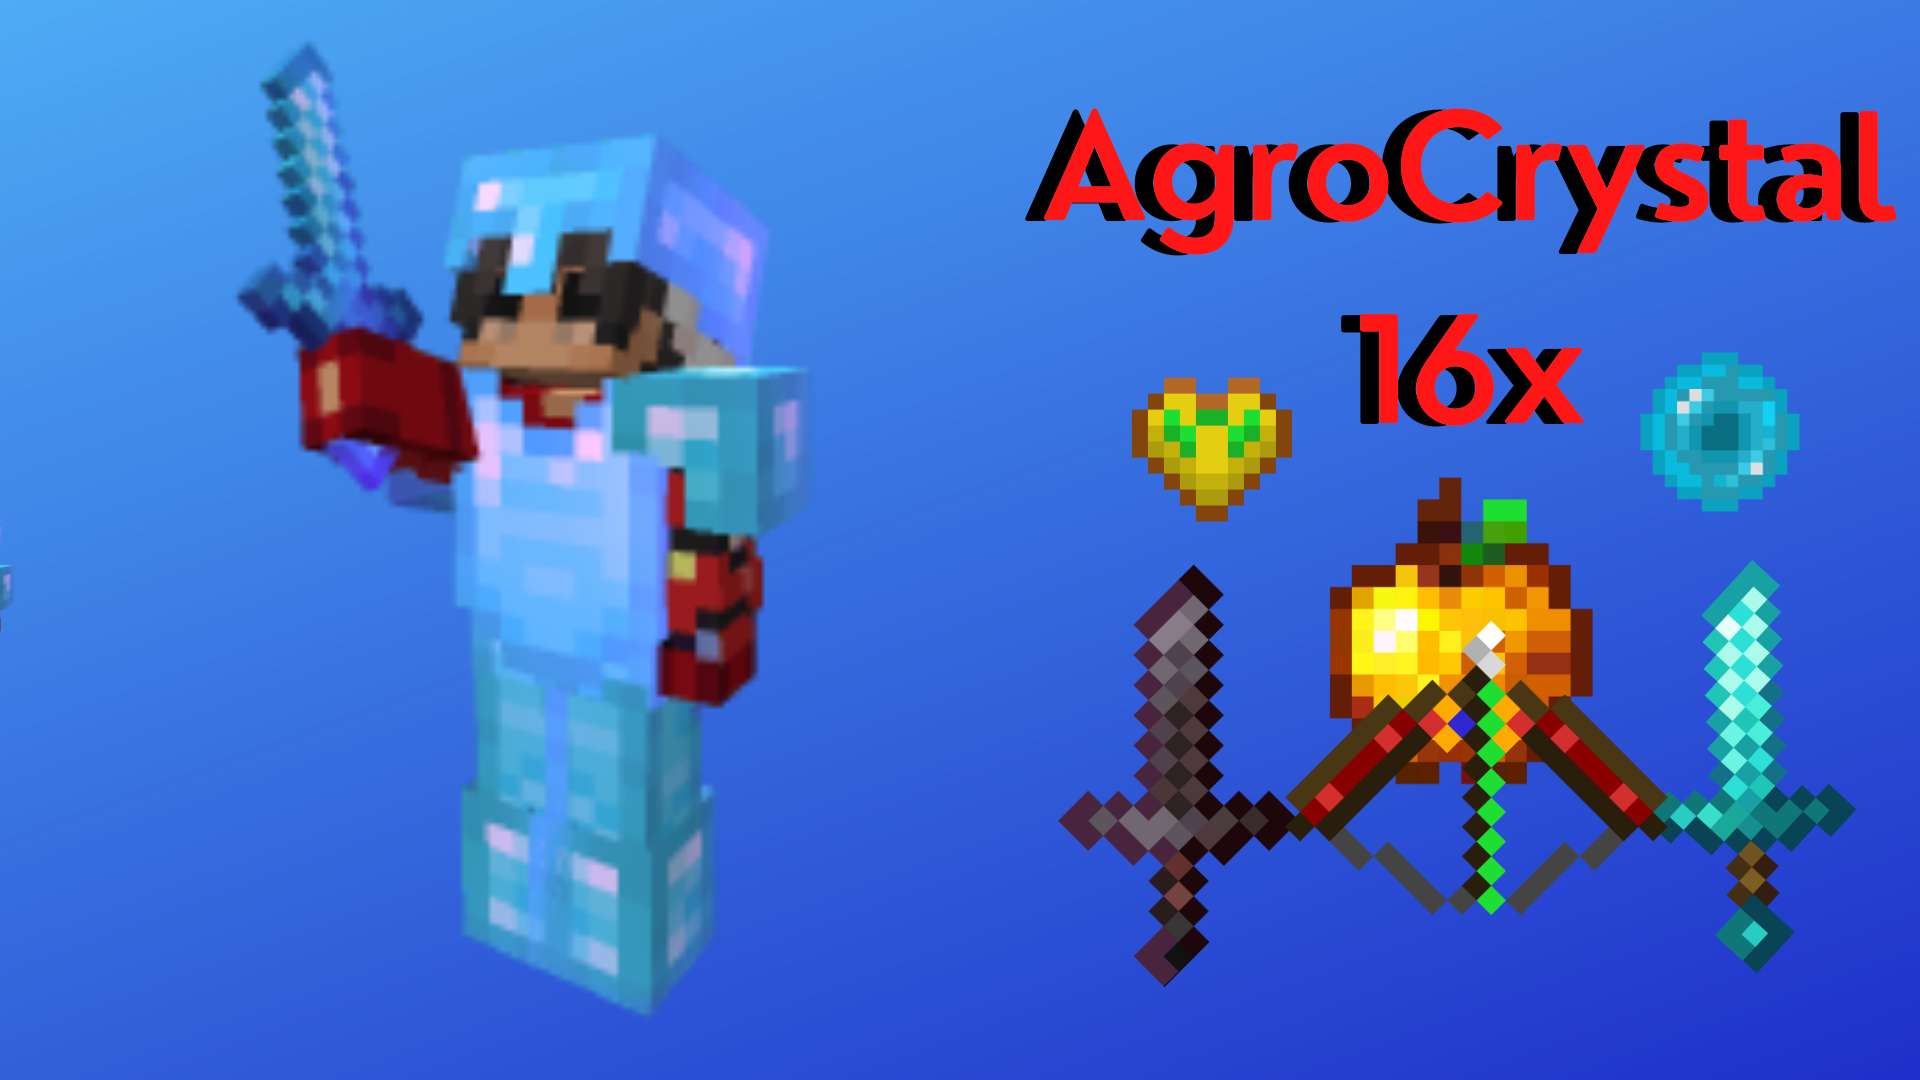 AgroCrystal - Default Edit 16x - 1.17 16 by AgronGamezYT on PvPRP